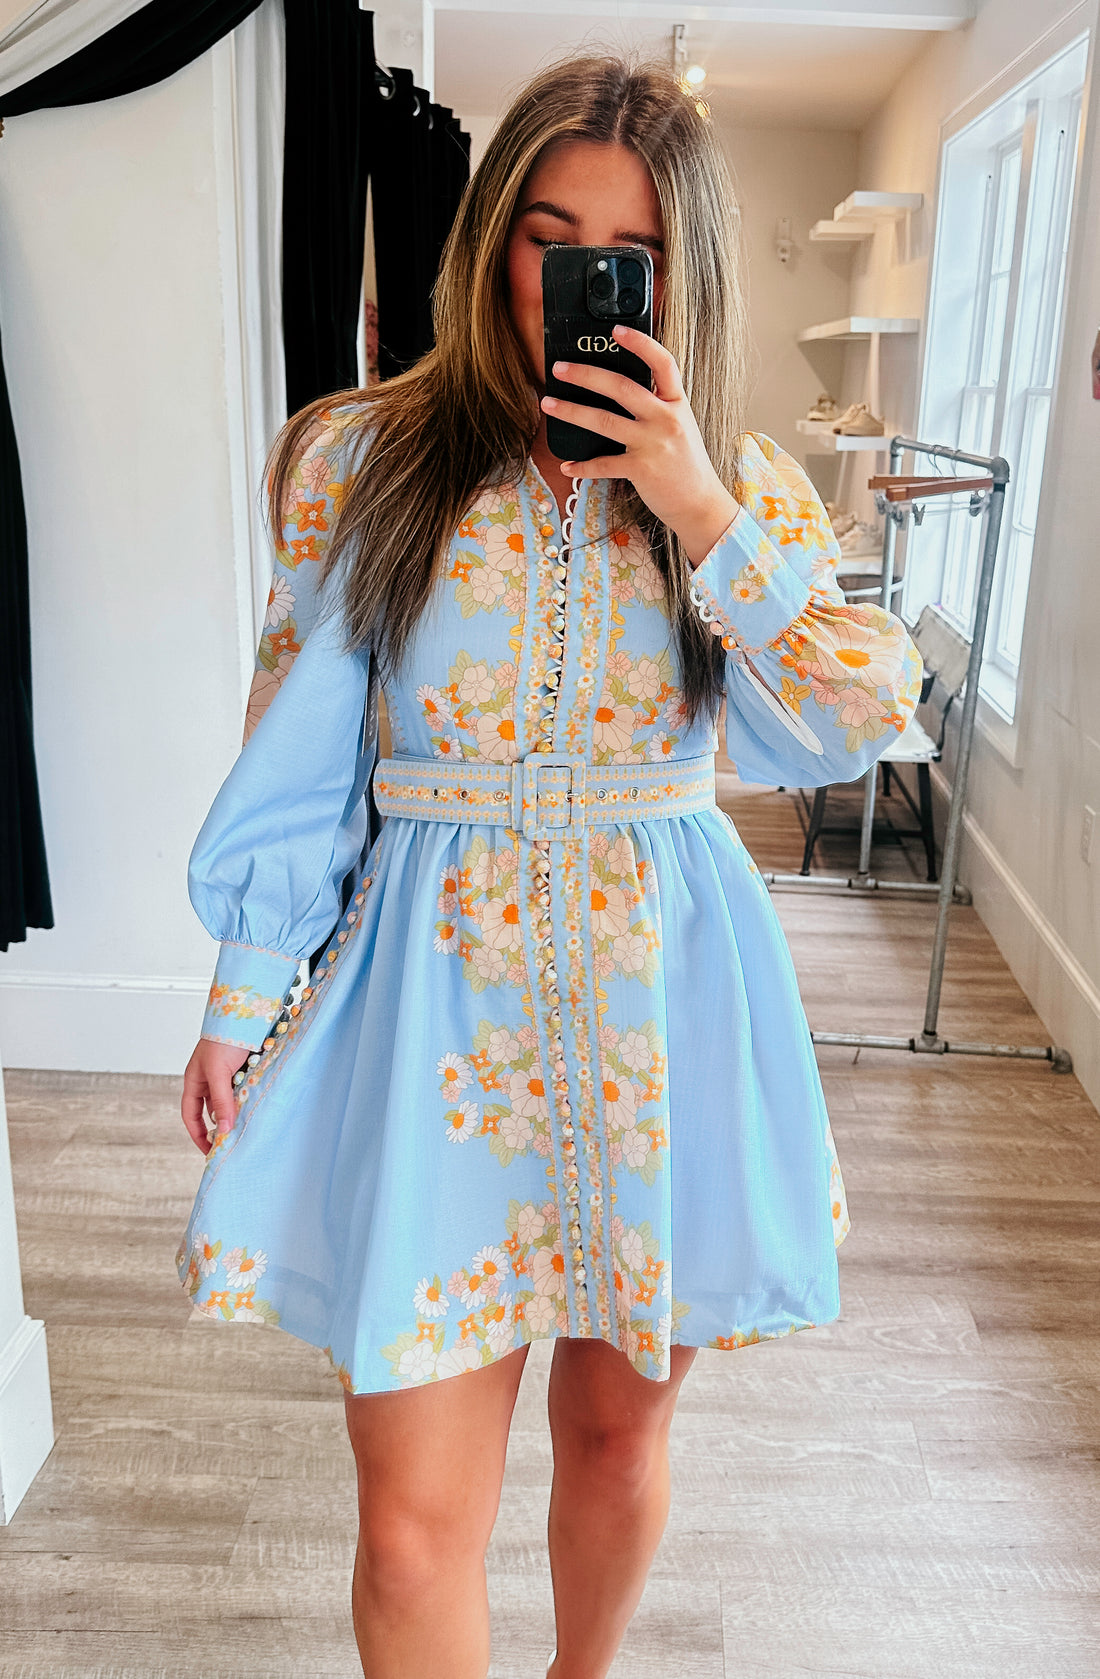 THE ALY BUTTONED DRESS